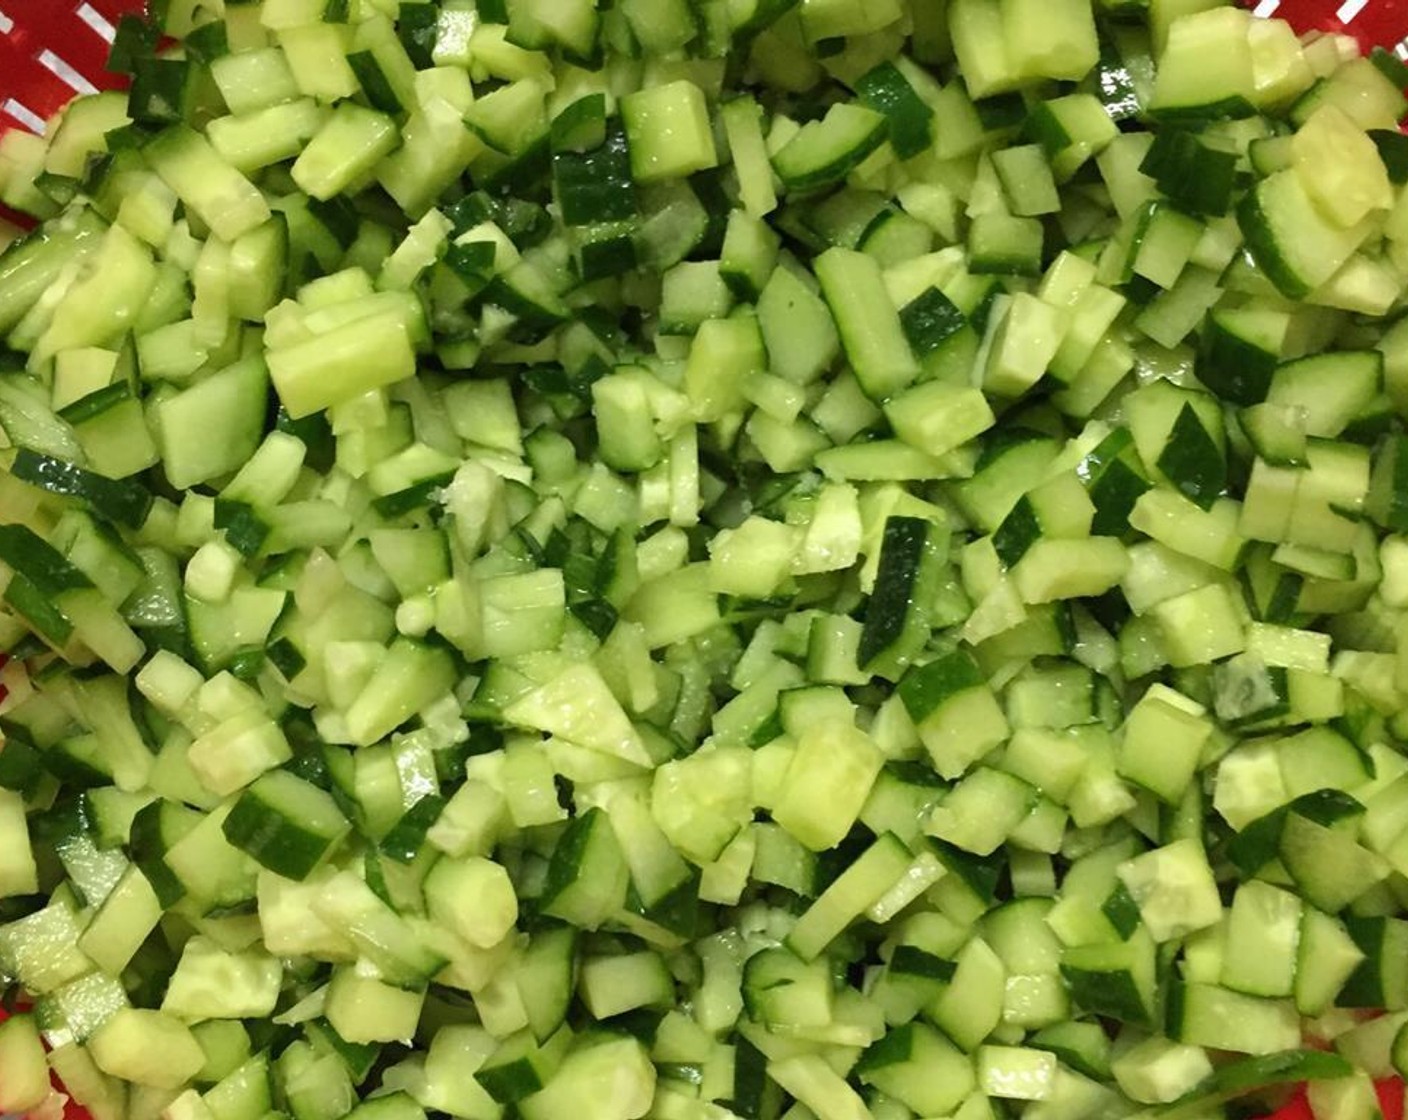 step 5 Toss the chopped cucumber with Salt (1 tsp). Let drain for a few minutes, or strain in a cheese cloth.